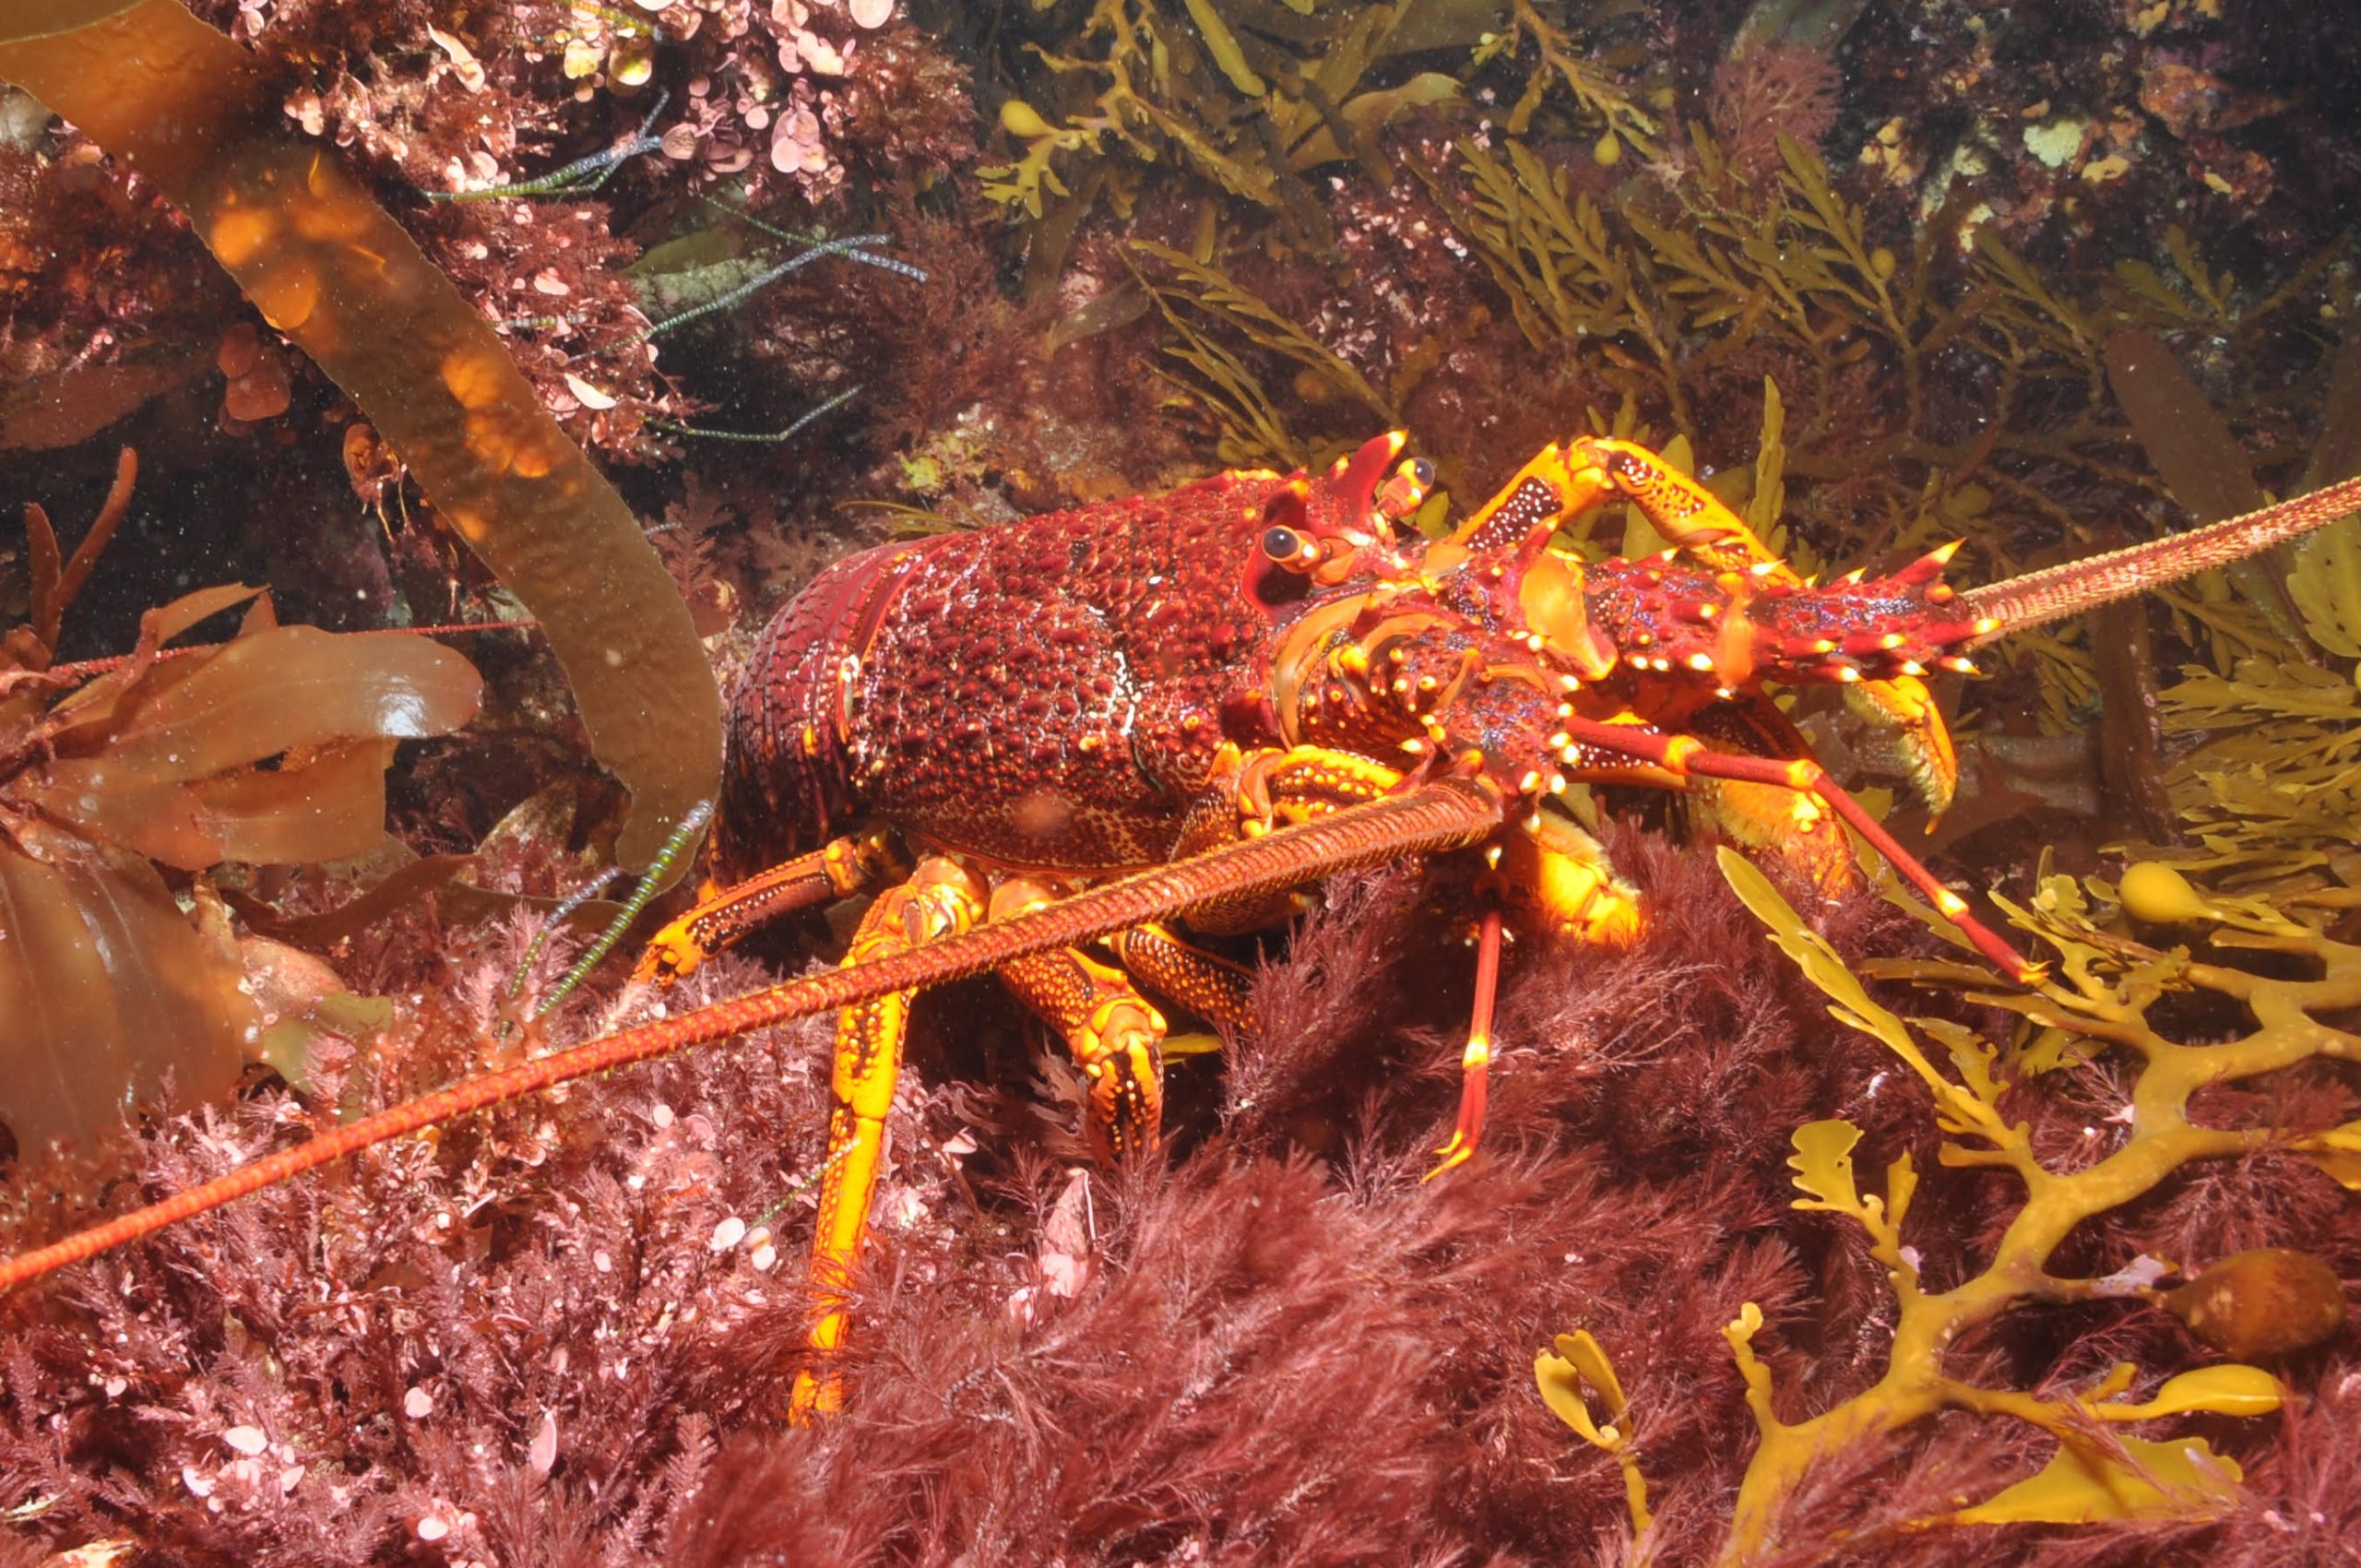 A carnivorous lobster (Jasus edwardsii) within a kelp and other macroalgal-dominated habitat on one of Australia’s many southerly, temperate reefs.